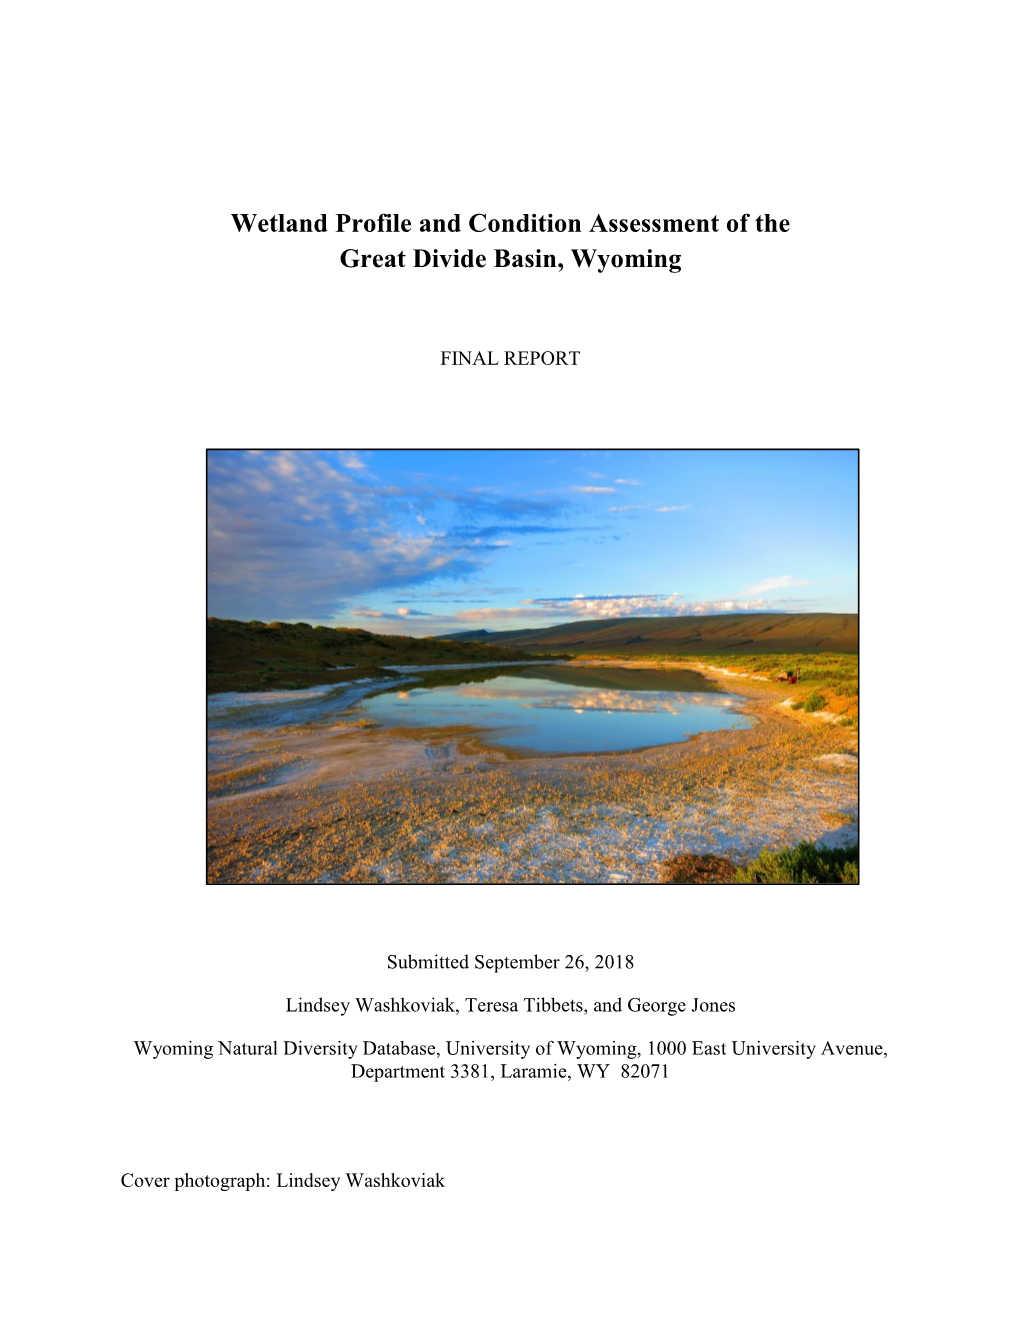 Wetland Profile and Condition Assessment of the Great Divide Basin, Wyoming